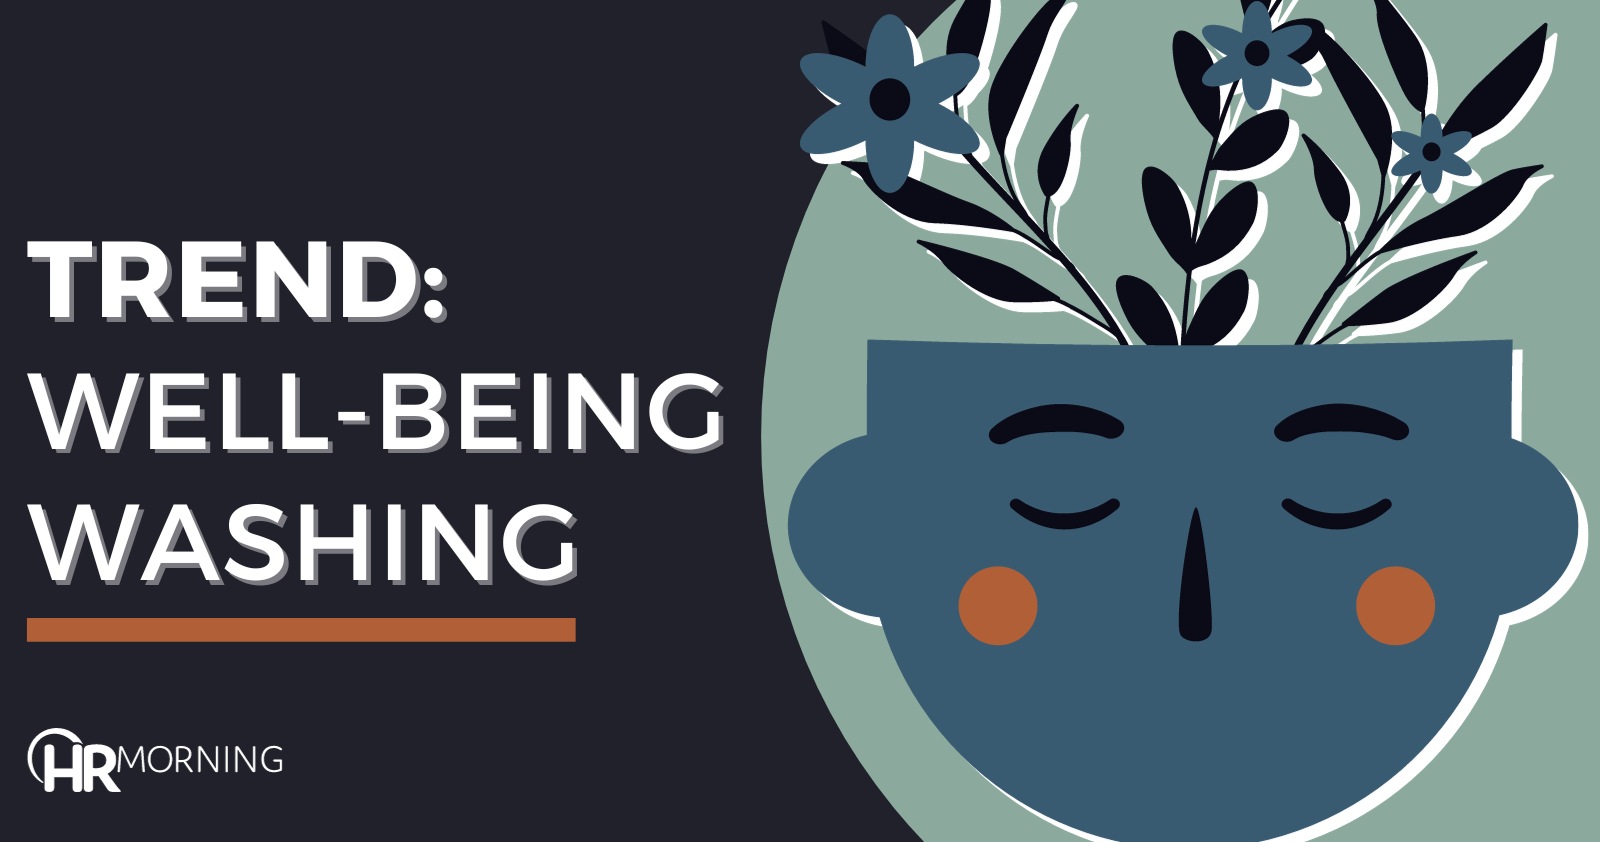 Trend: Well-being washing